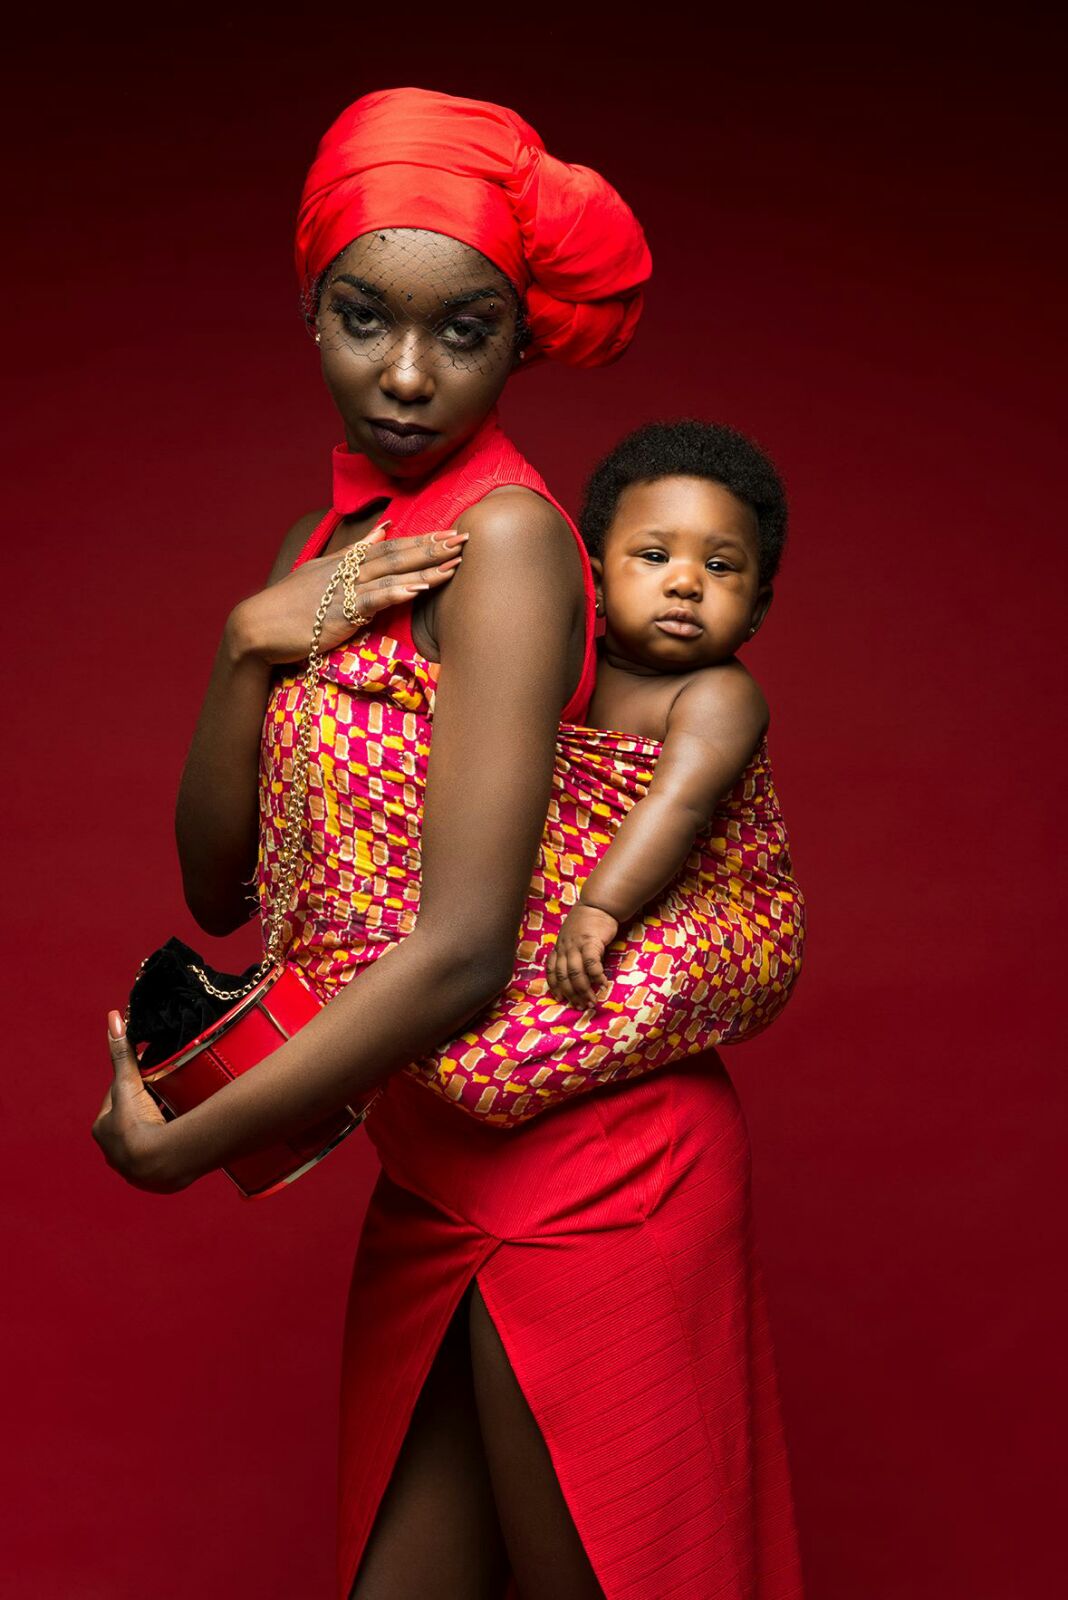 A study in glamour, motherhood and tradition